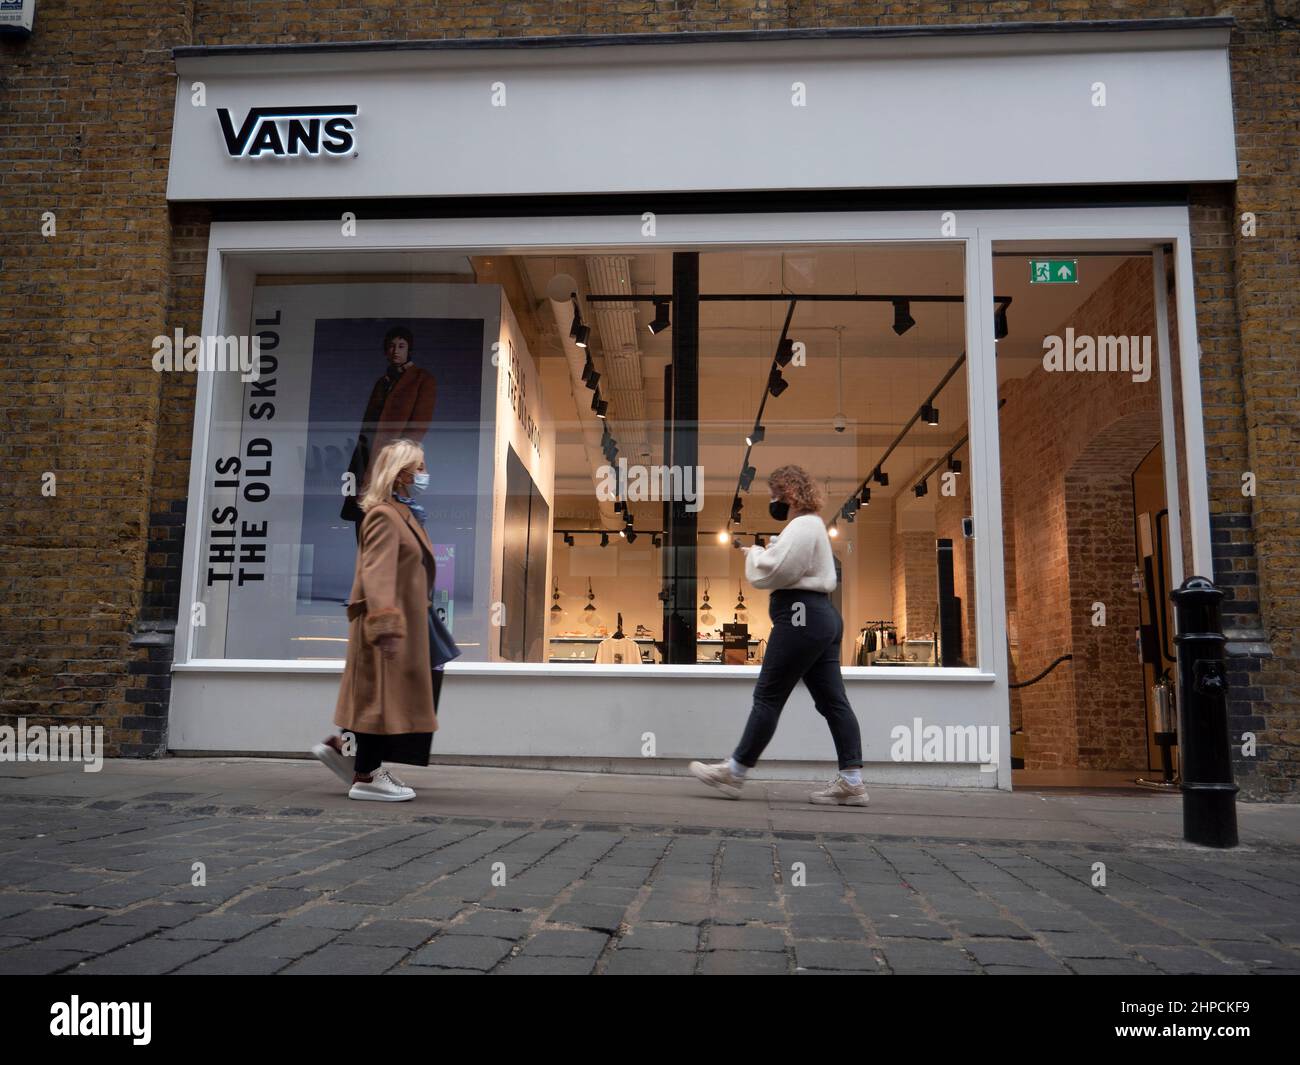 Vans Shoes High Resolution Stock Photography and Images - Alamy صور زرقاء سادة